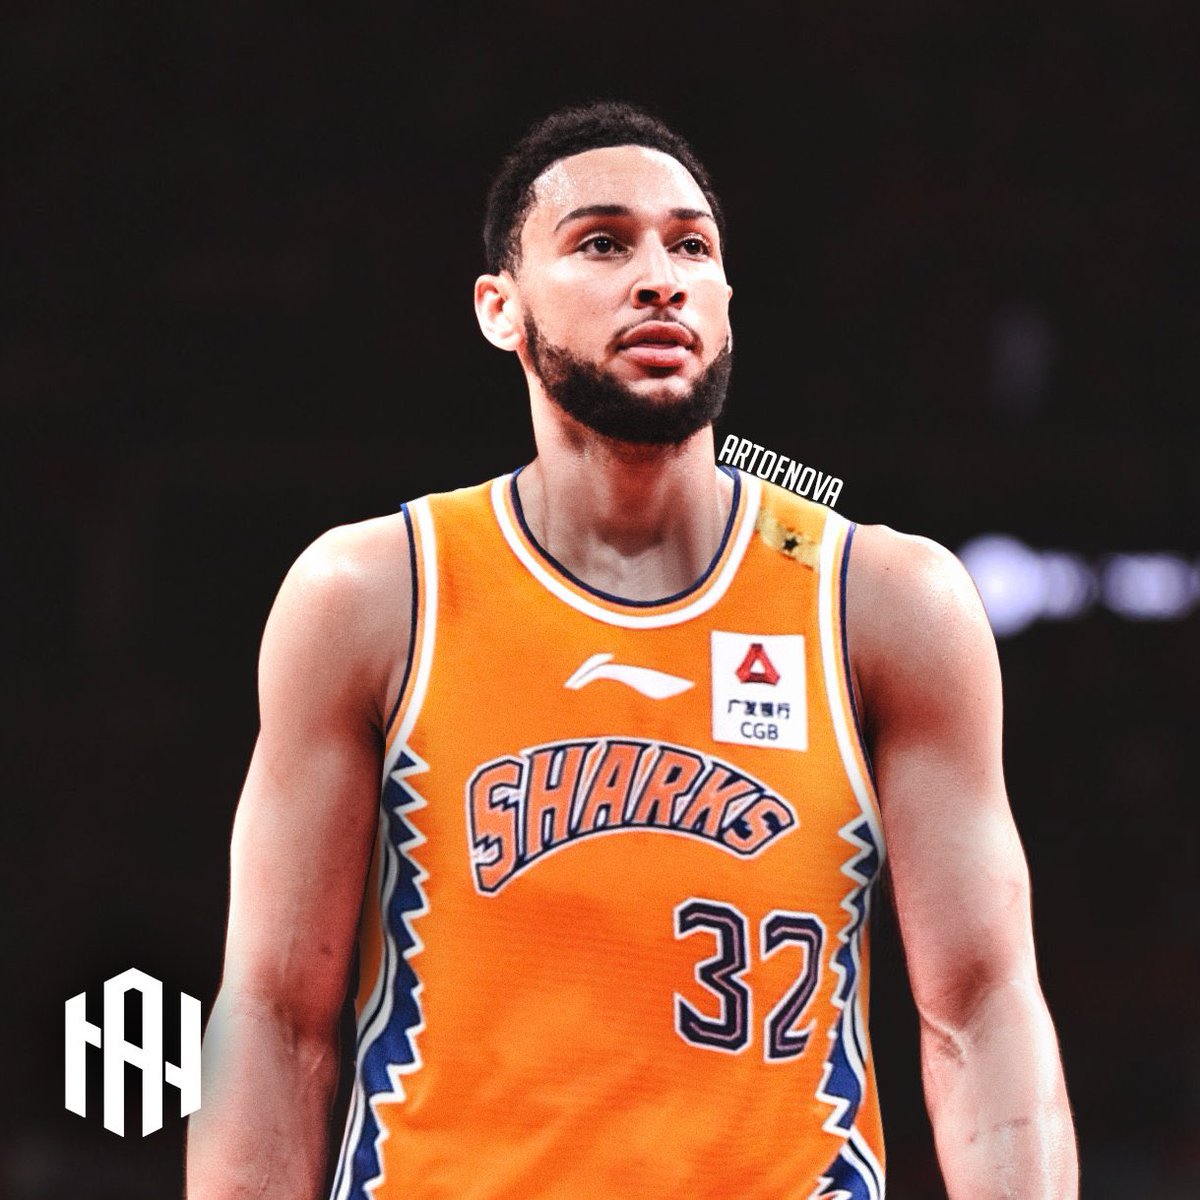 Ben Simmons is the Shanghai Sharks' NEW Point Guard! 